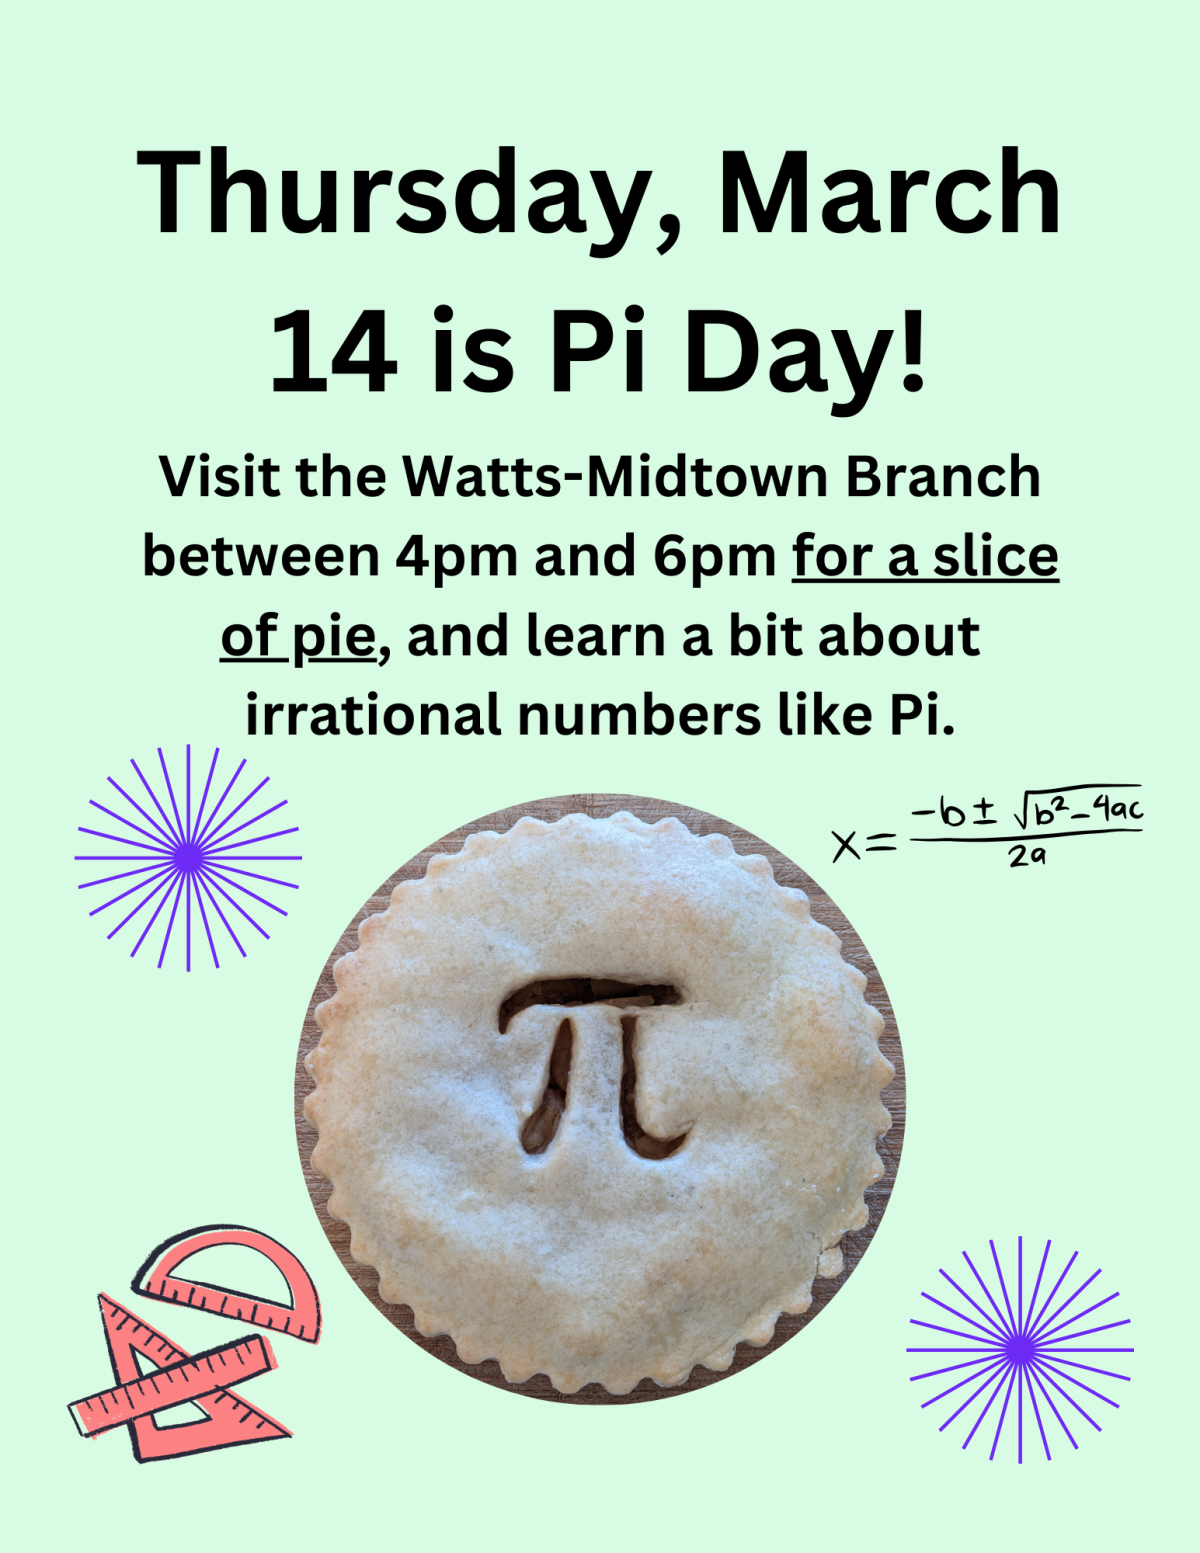 A pie with the pi symbol on it is surrounded by the quadratic formula, two blue shapes, and some red protractors, all on a light green background.